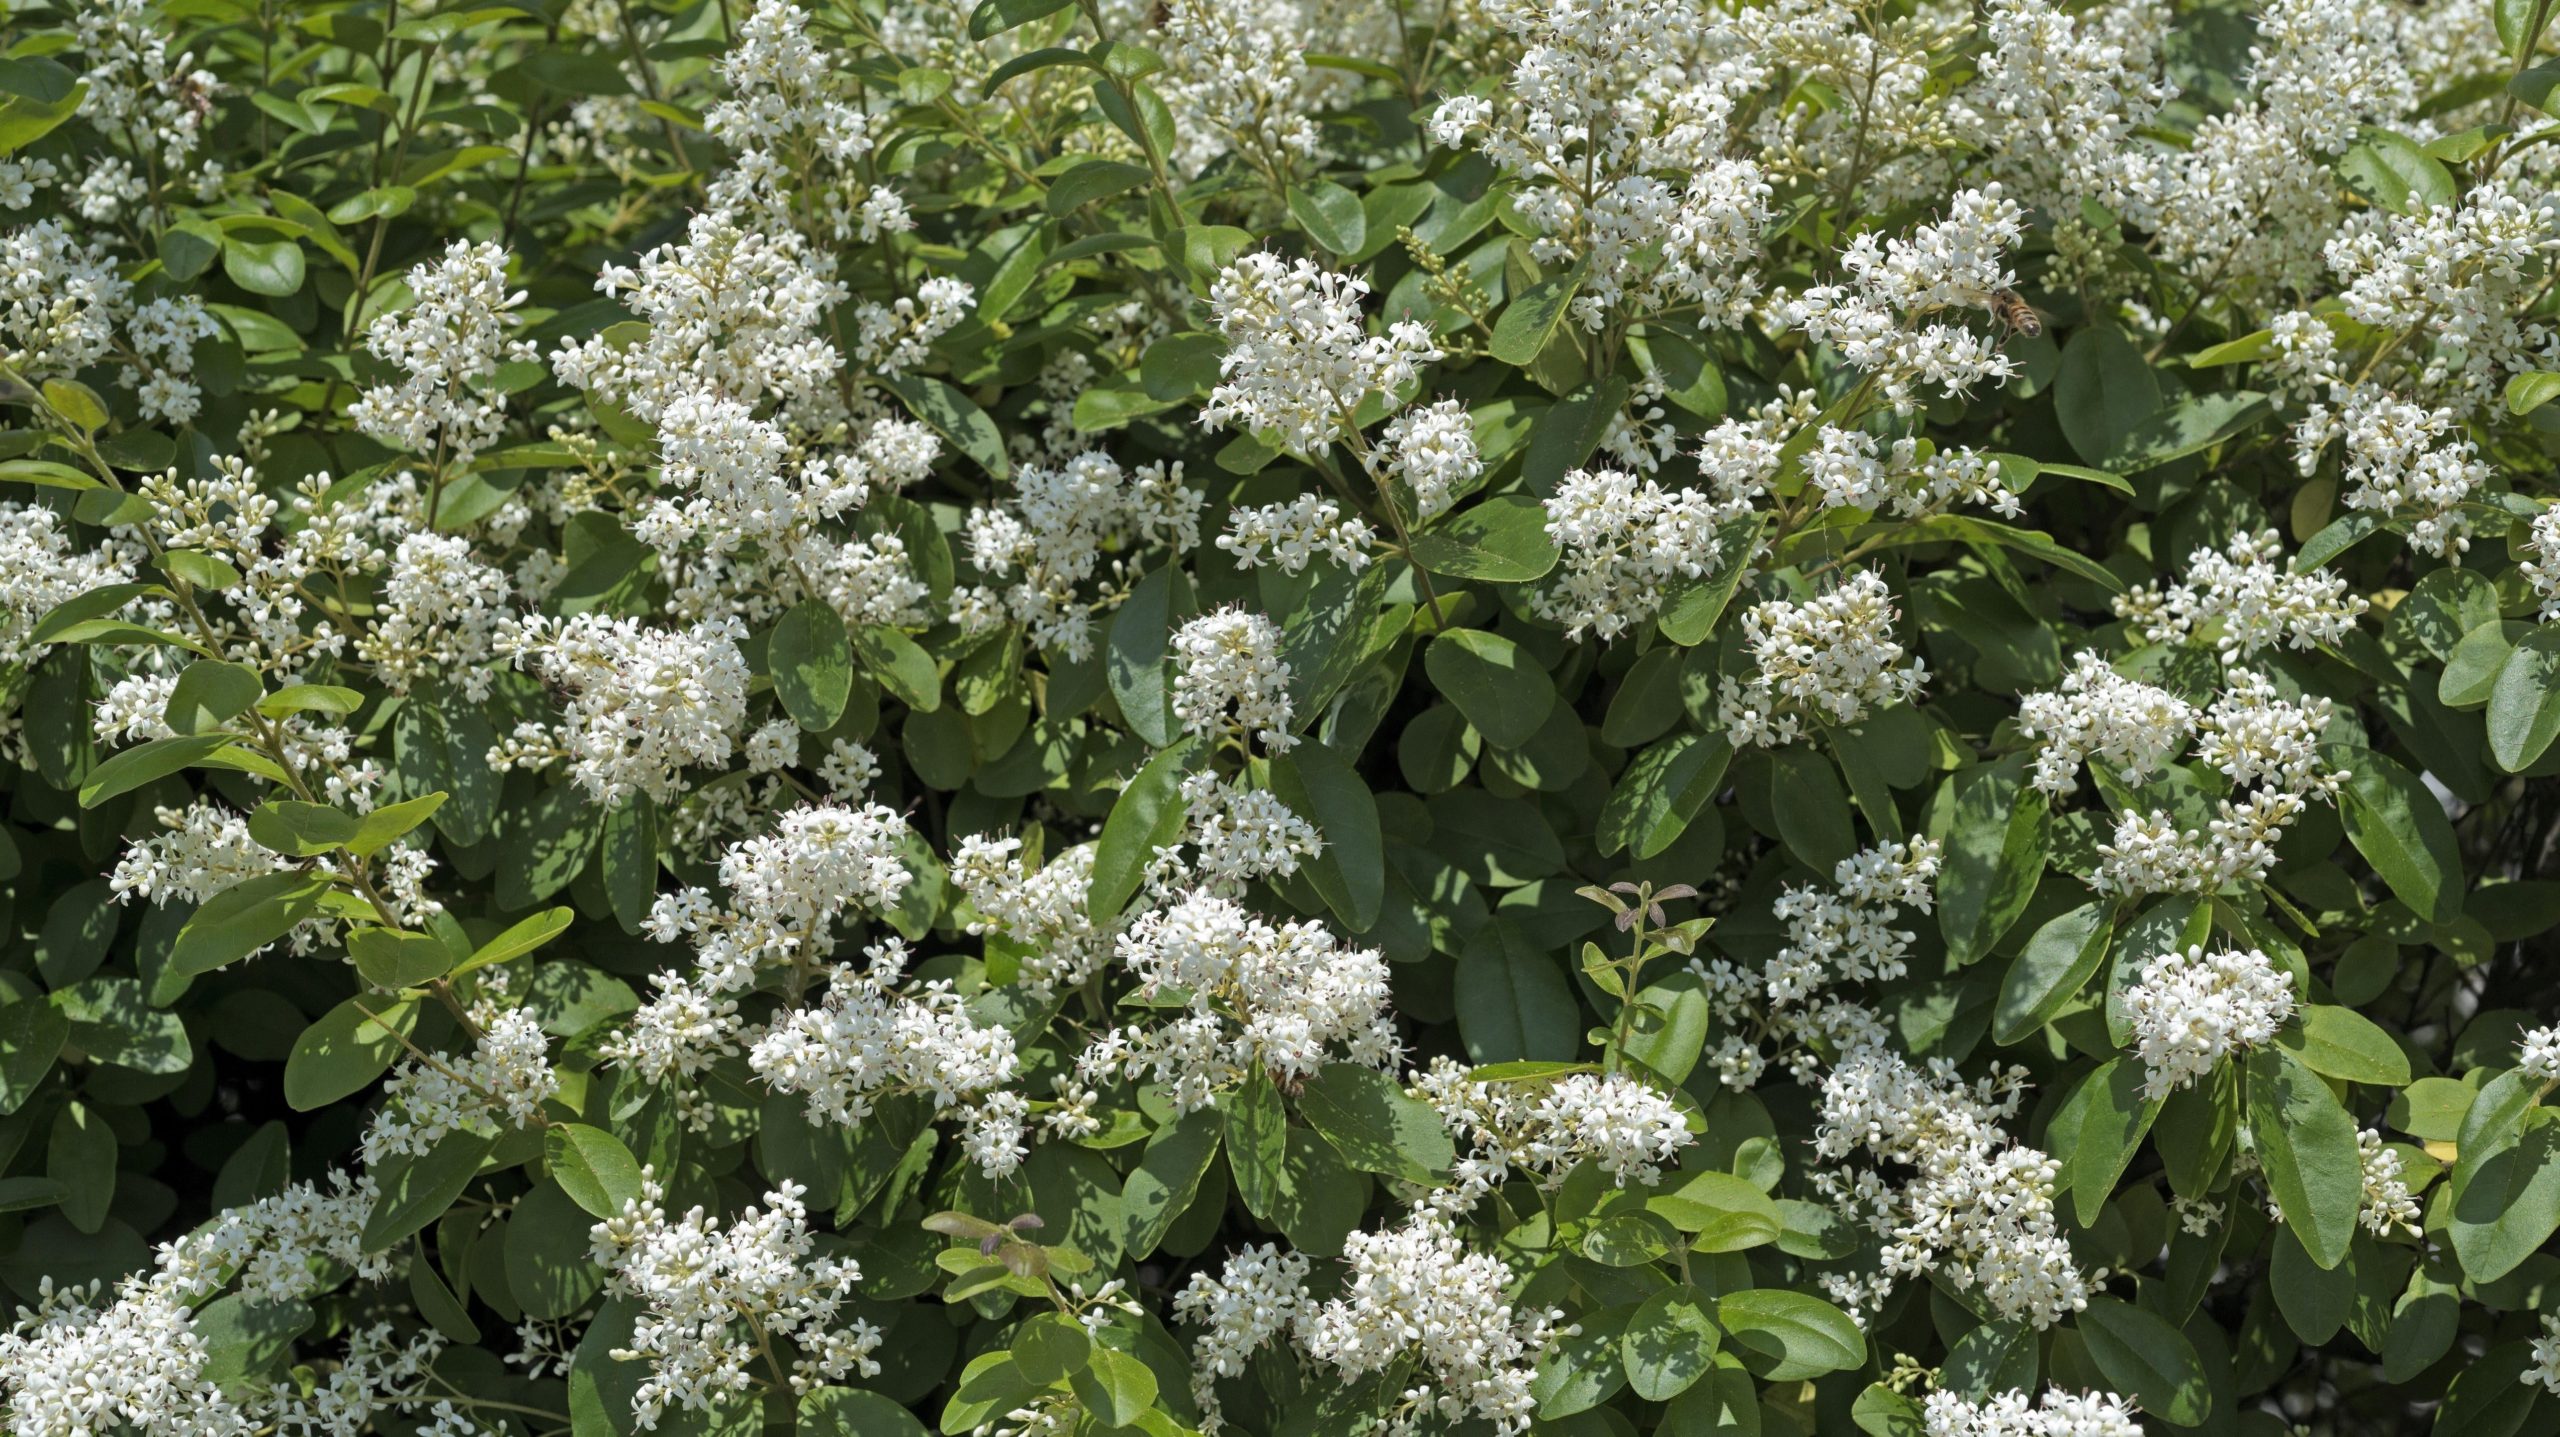 Privet flowers. (Photo: Prisma by Dukas/Universal Images Group, Getty Images)